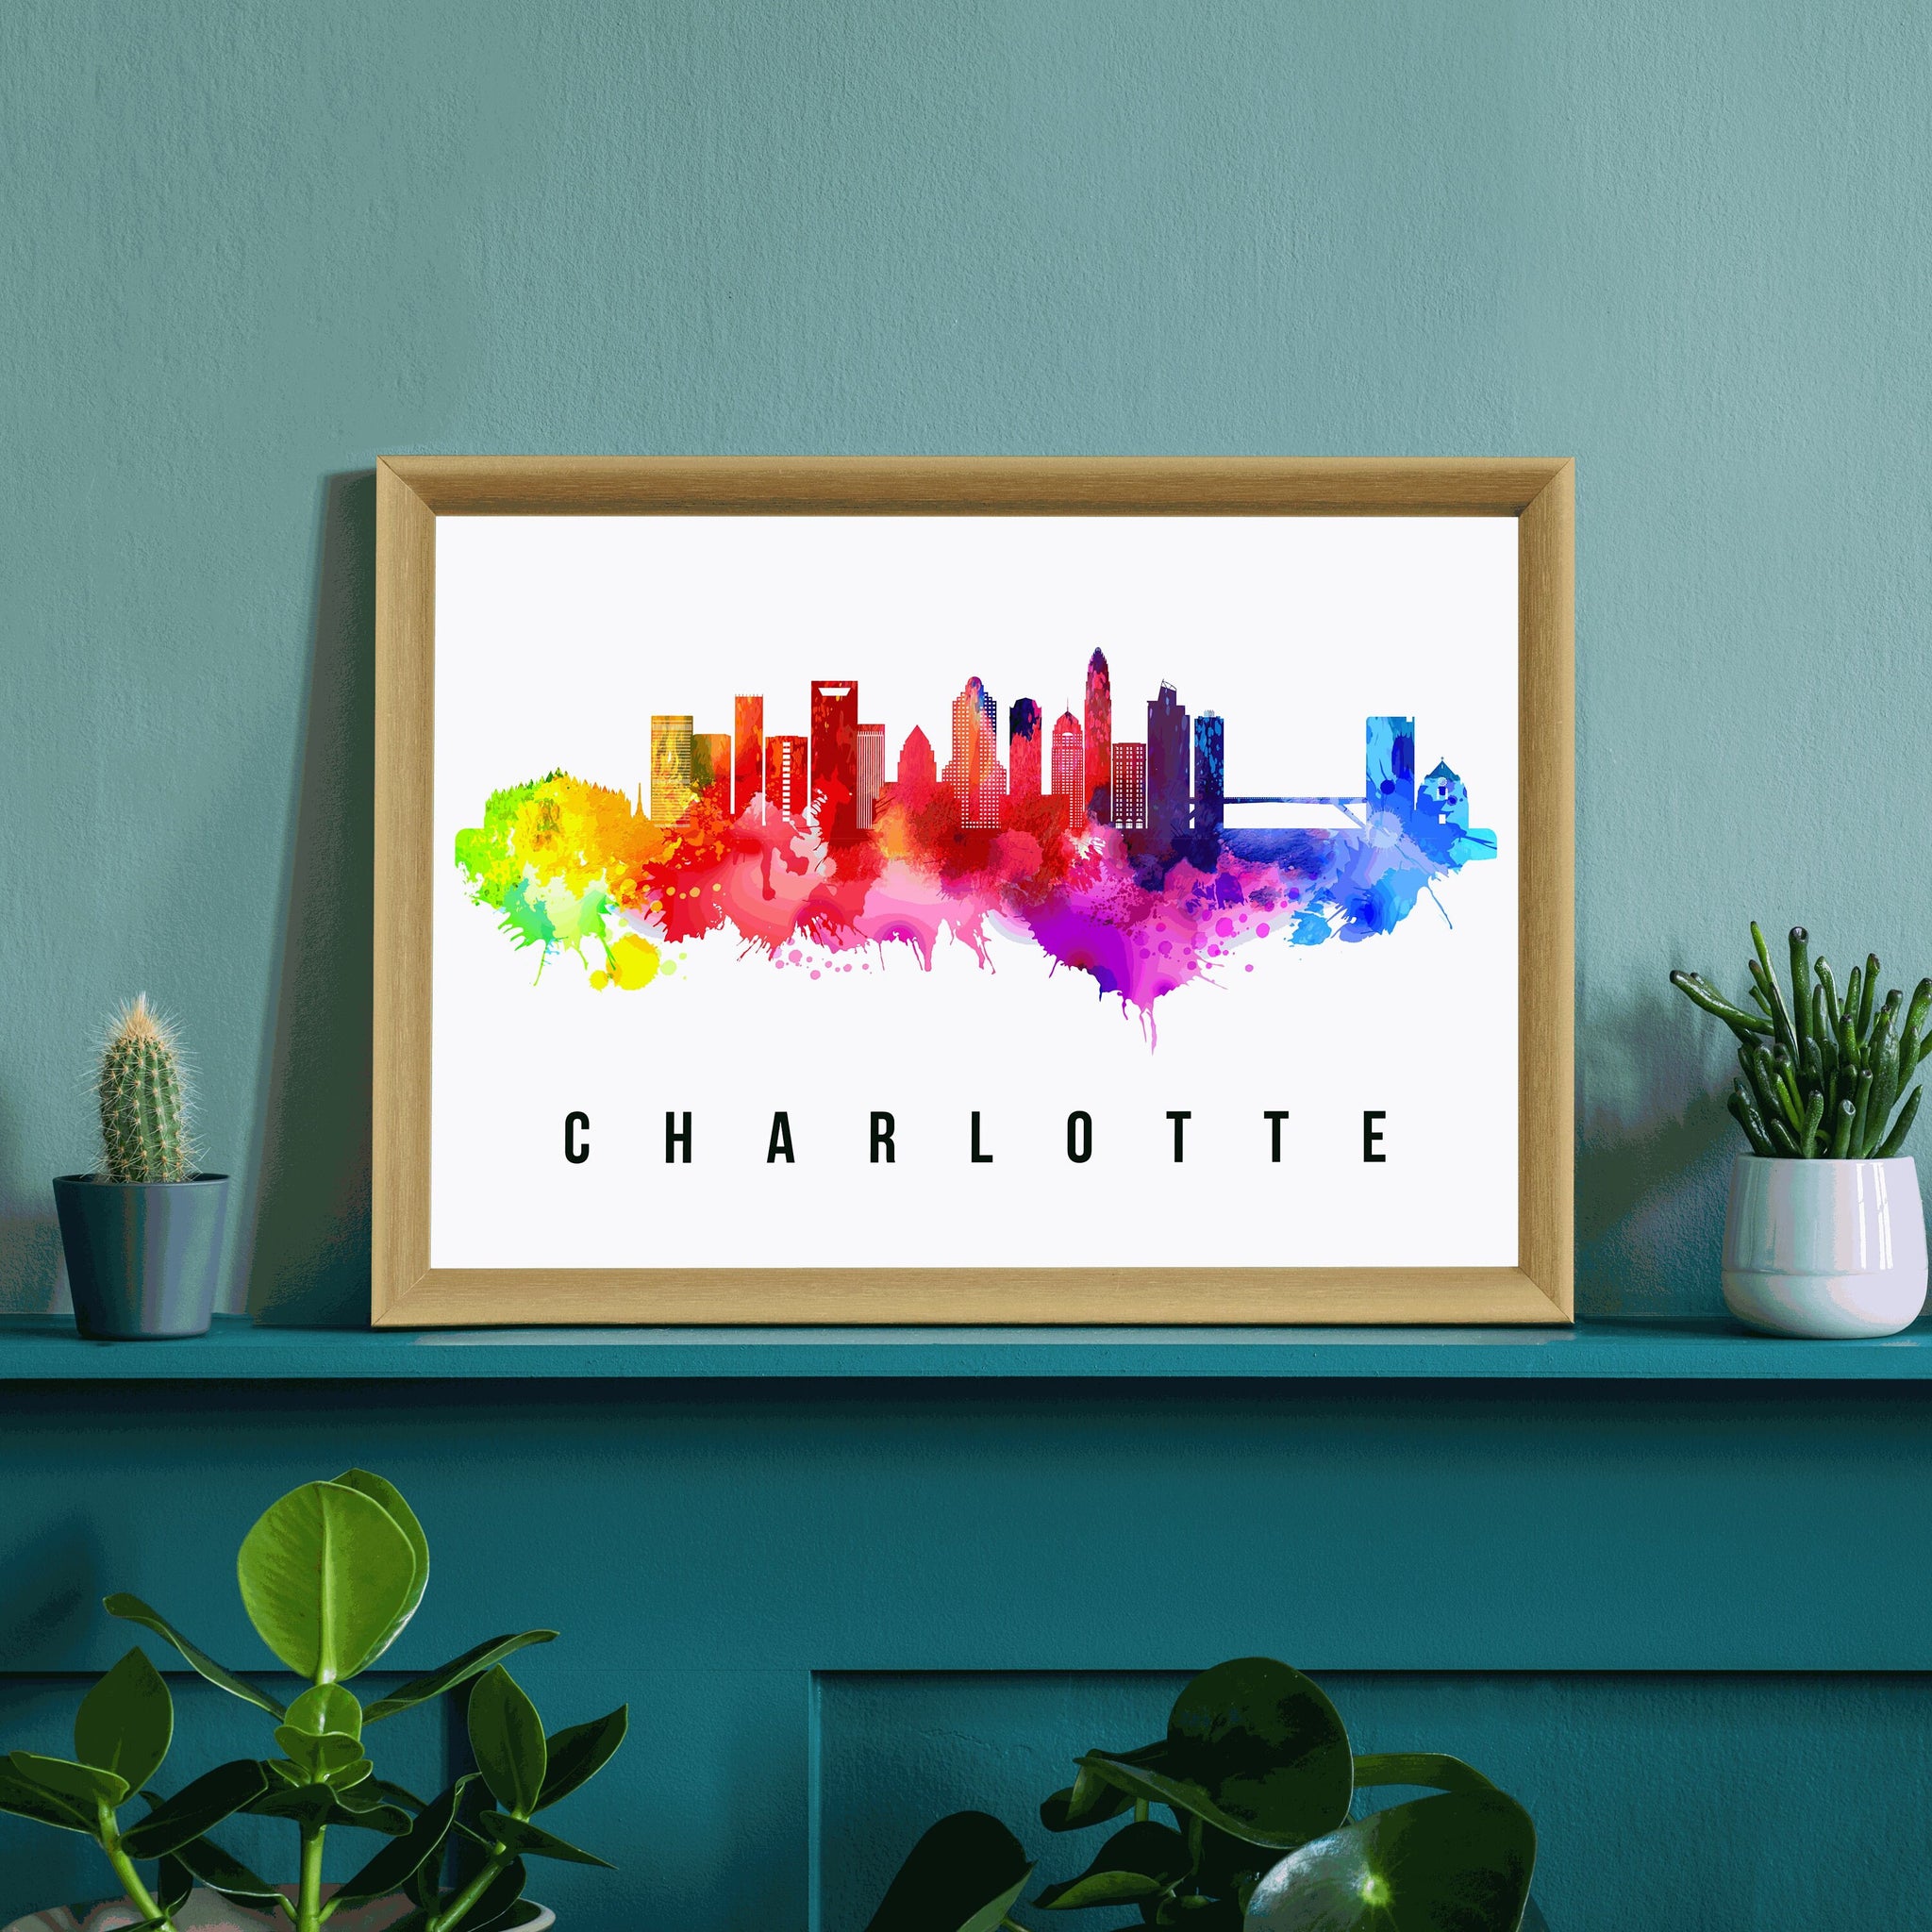 Charlotte - North Carolina Skyline Poster, Charlotte Cityscape Painting, Charlotte Landmark and Cityscape Print, Home and Office Wall Art